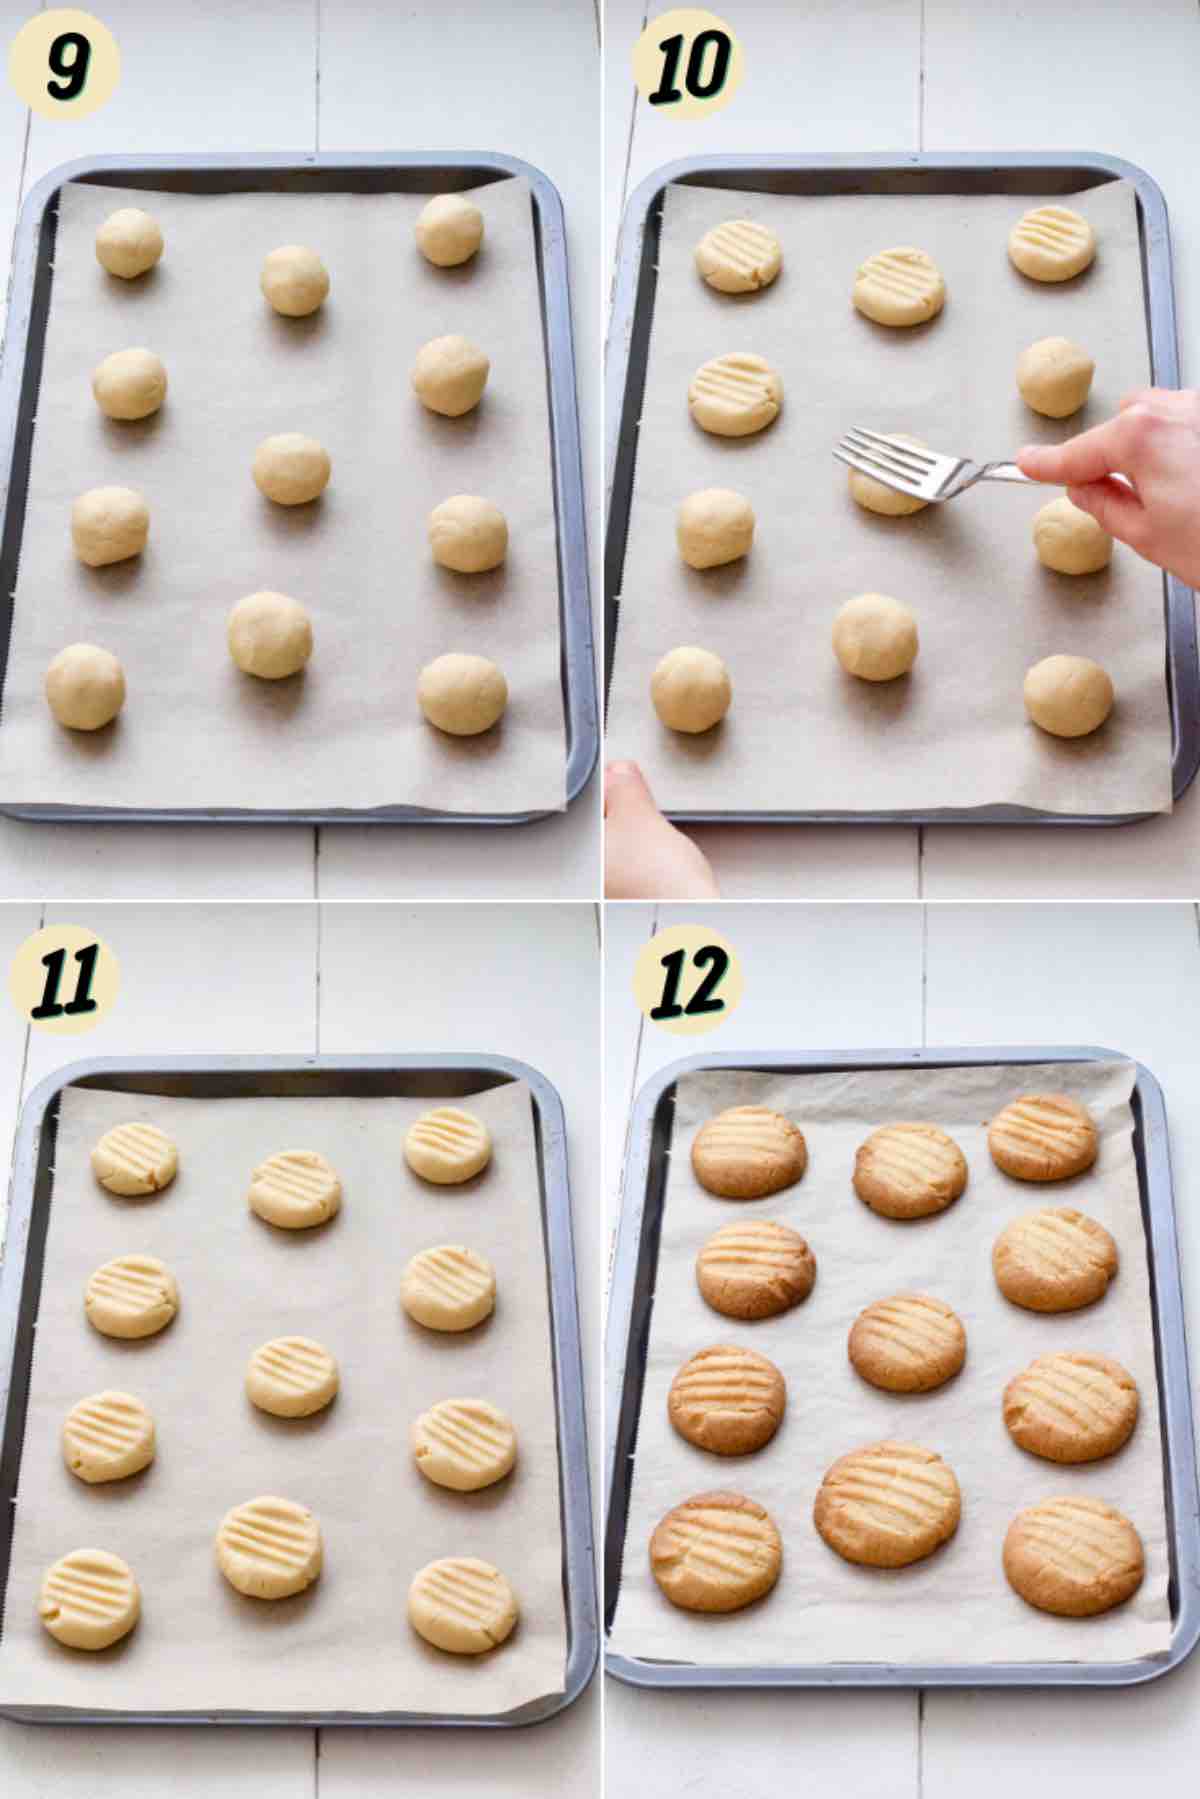 Making fork imprint on biscuits and biscuits before and after baking.